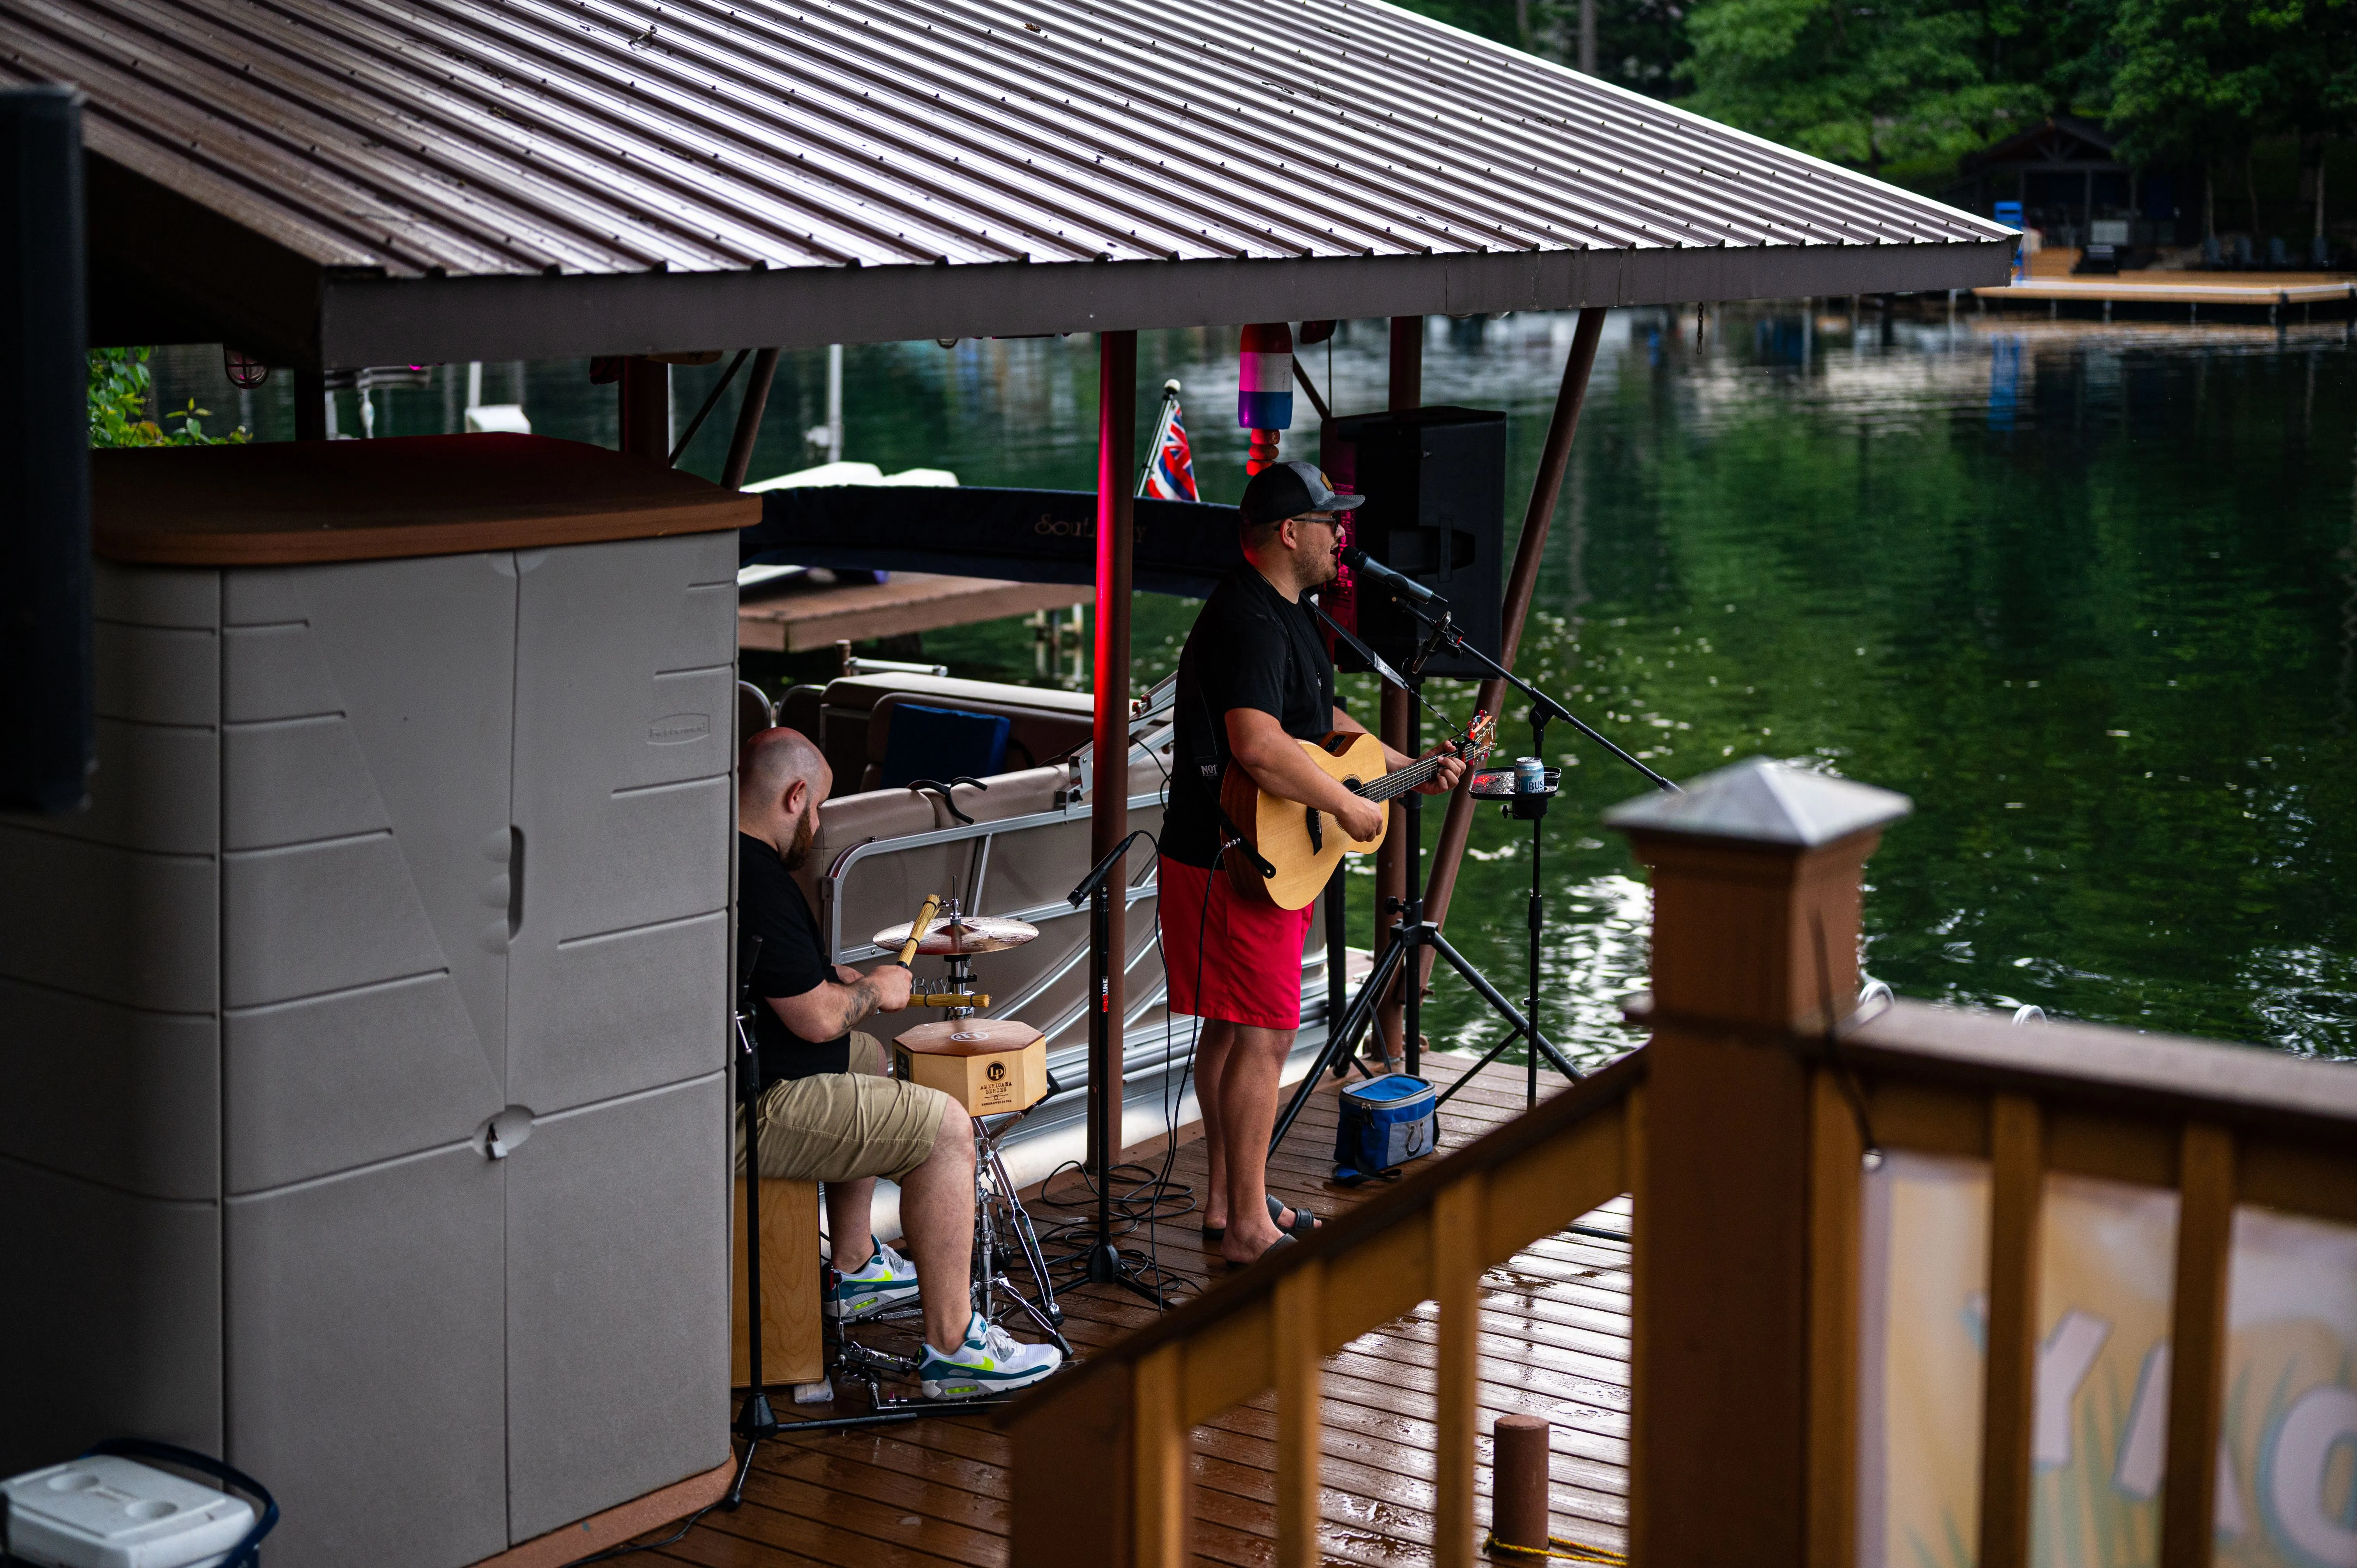 Two musicians performing on a covered dock by a lake, one playing drums and the other playing guitar.